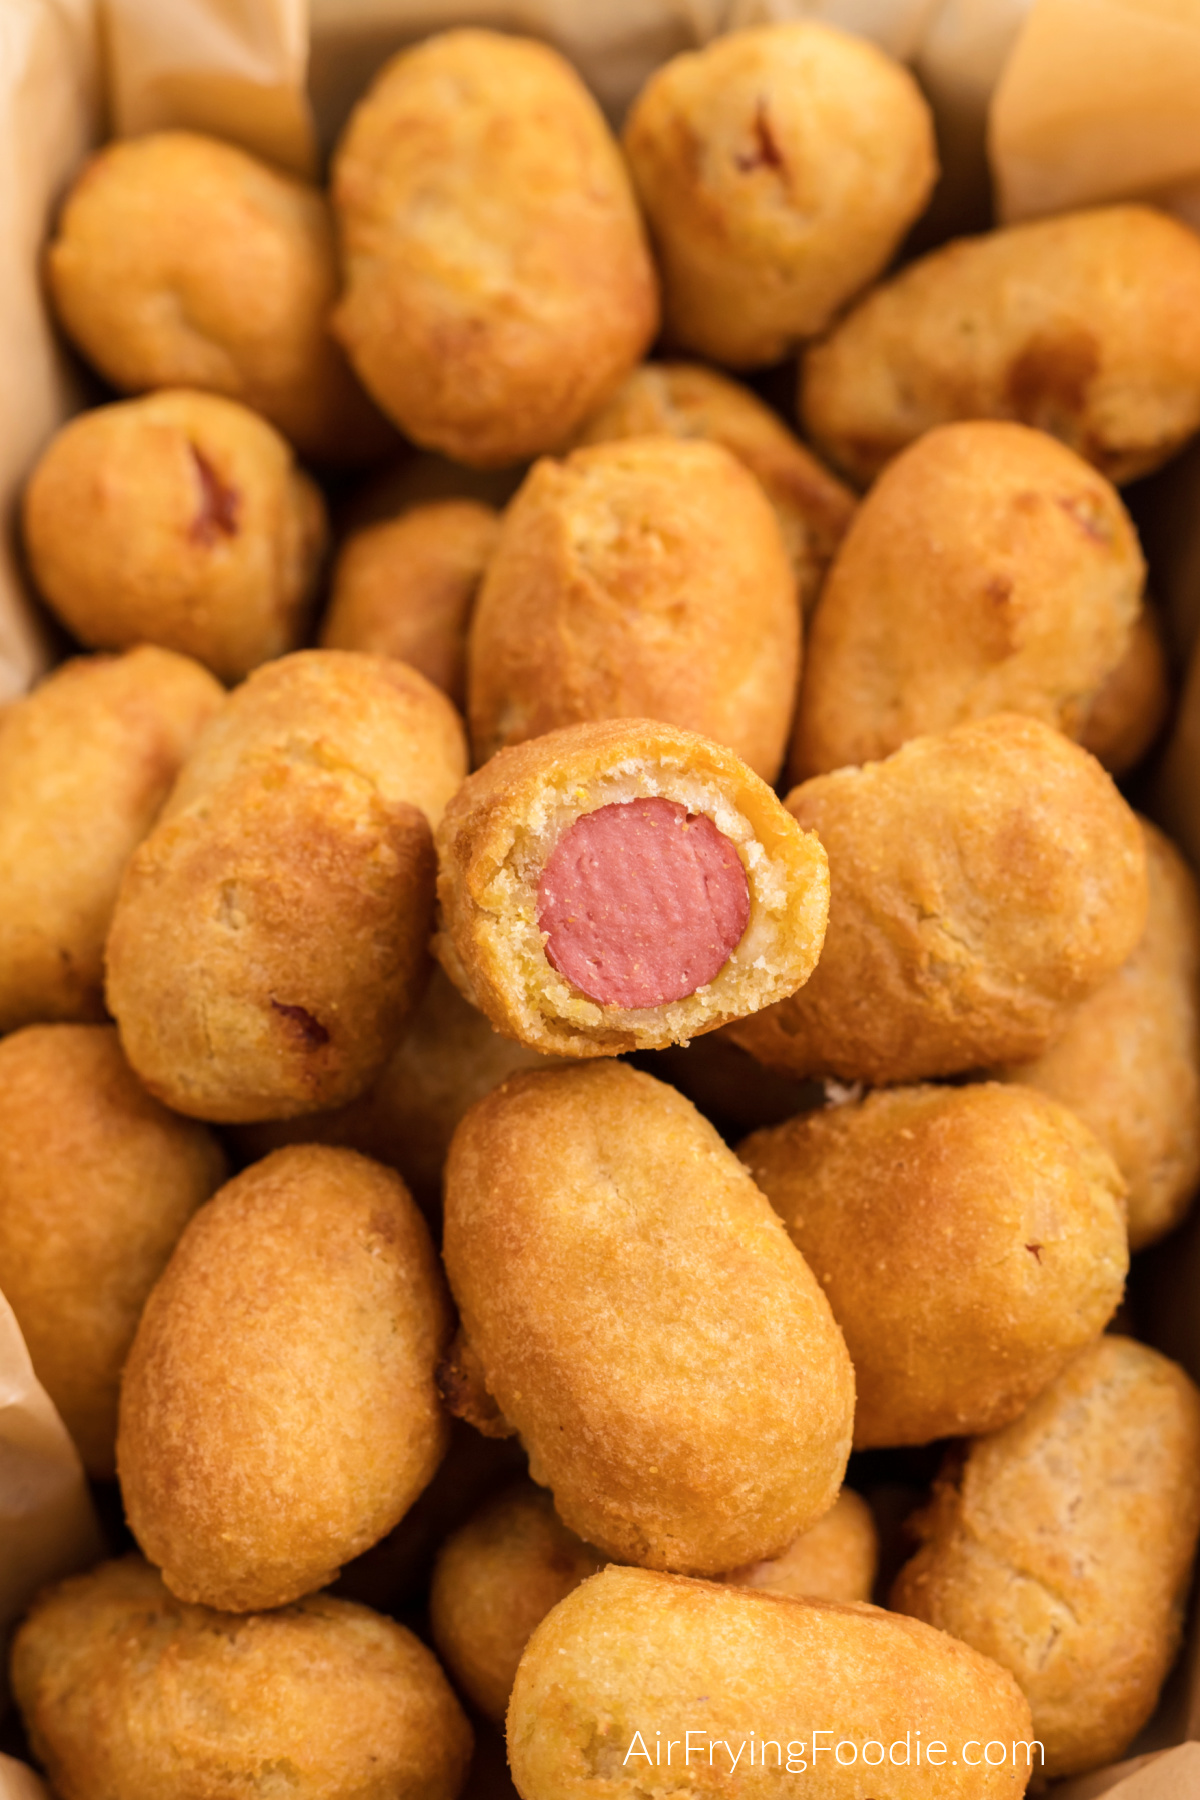 Basket of mini corn dogs made in the air fryer, with one corn dog cut into half.